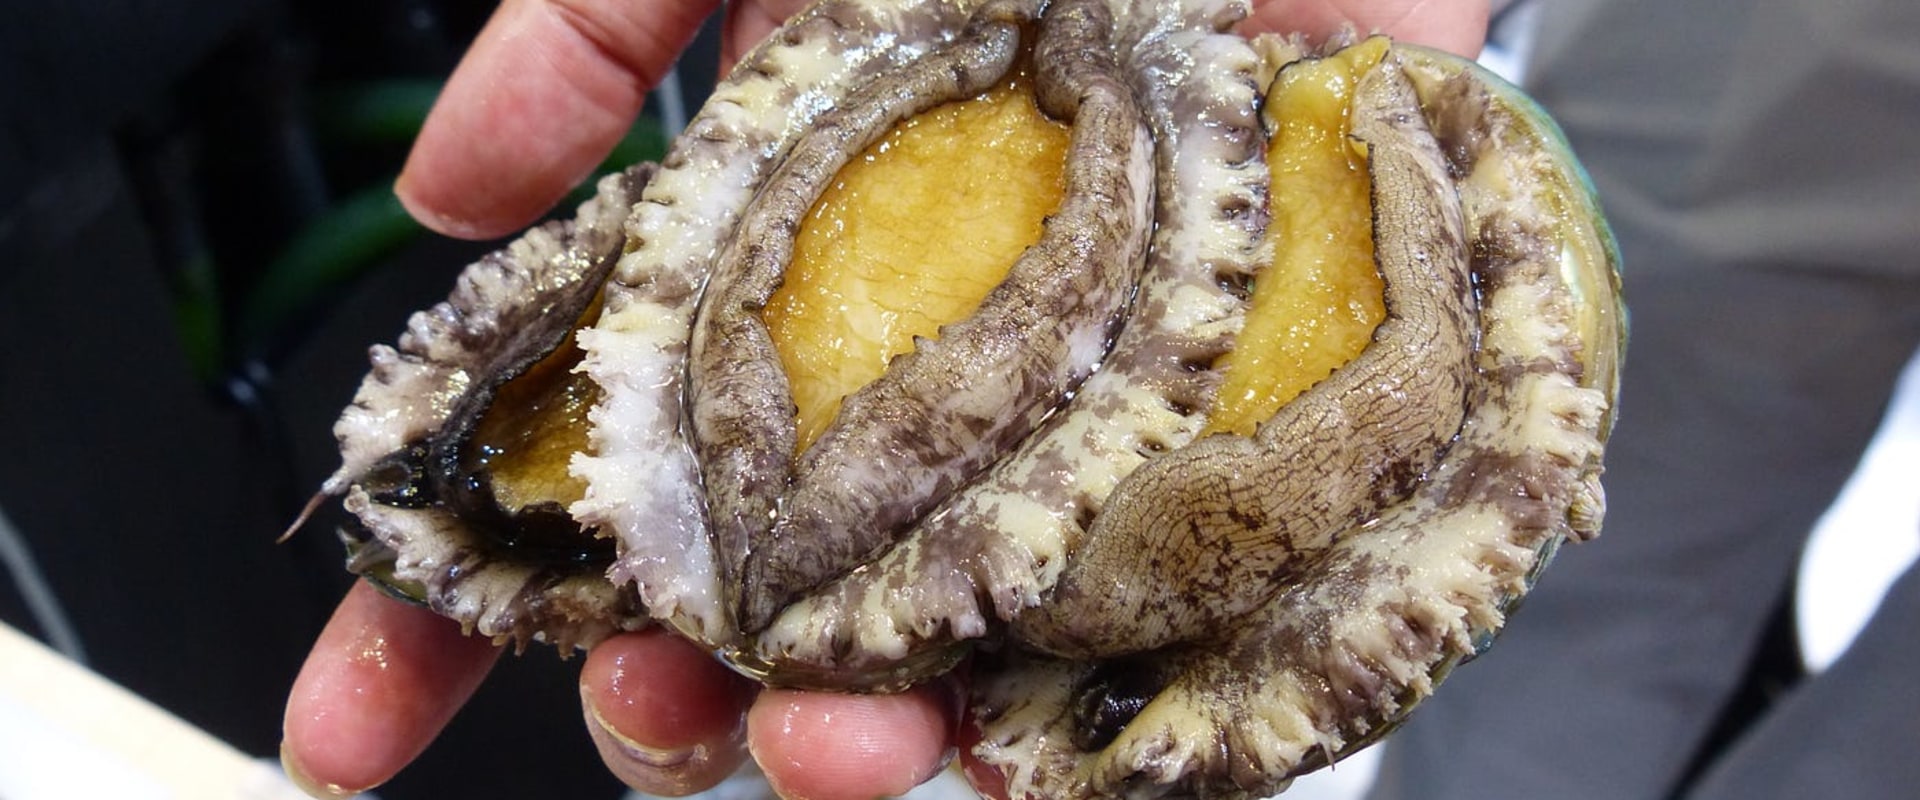 Efforts to Promote Sustainable and Responsible Practices in Abalone Farming